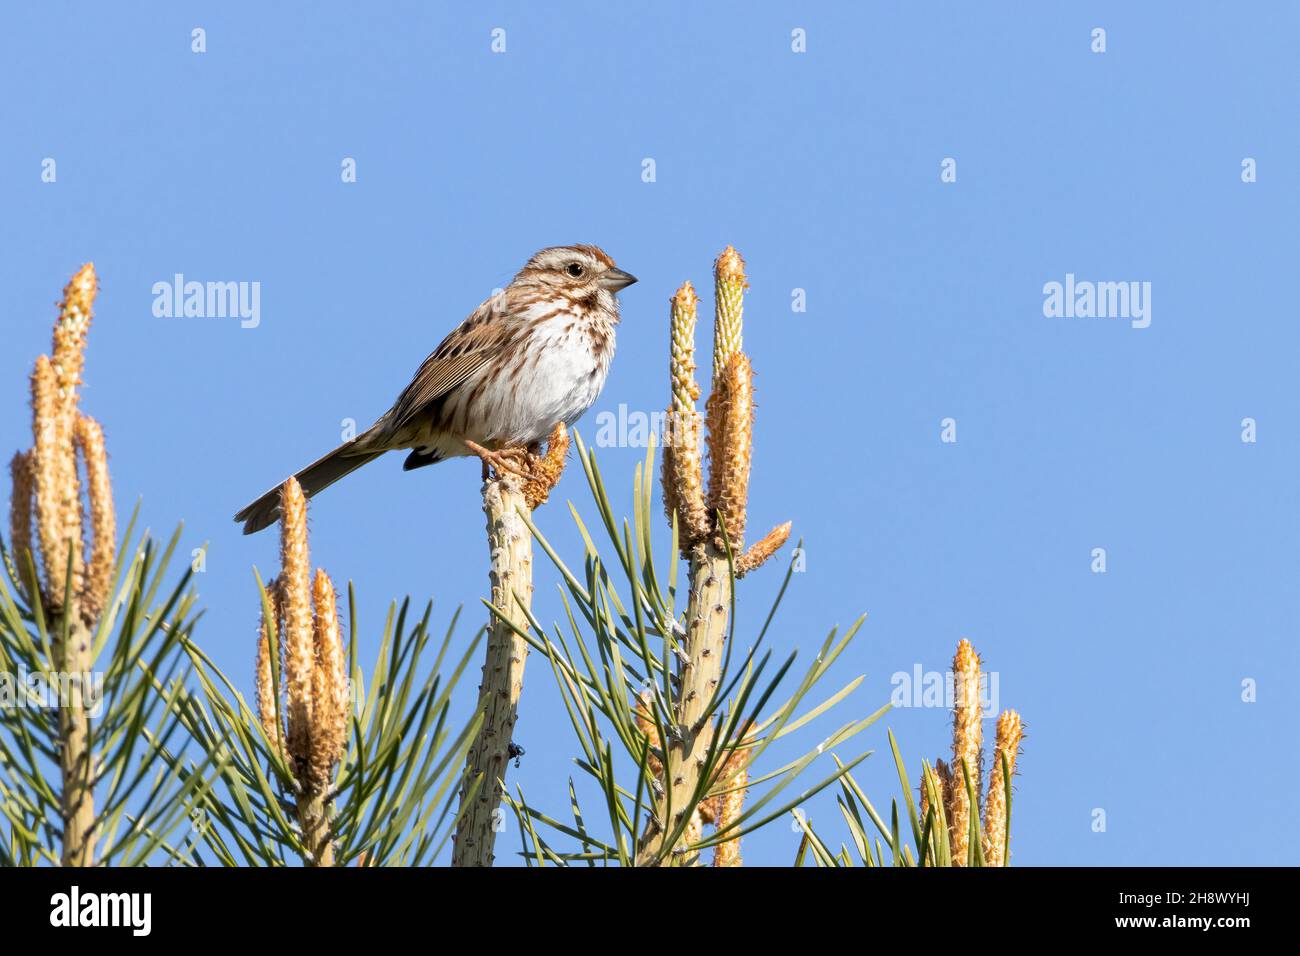 Small song sparrow perched on a top of a pine tree with clear blue sky Stock Photo